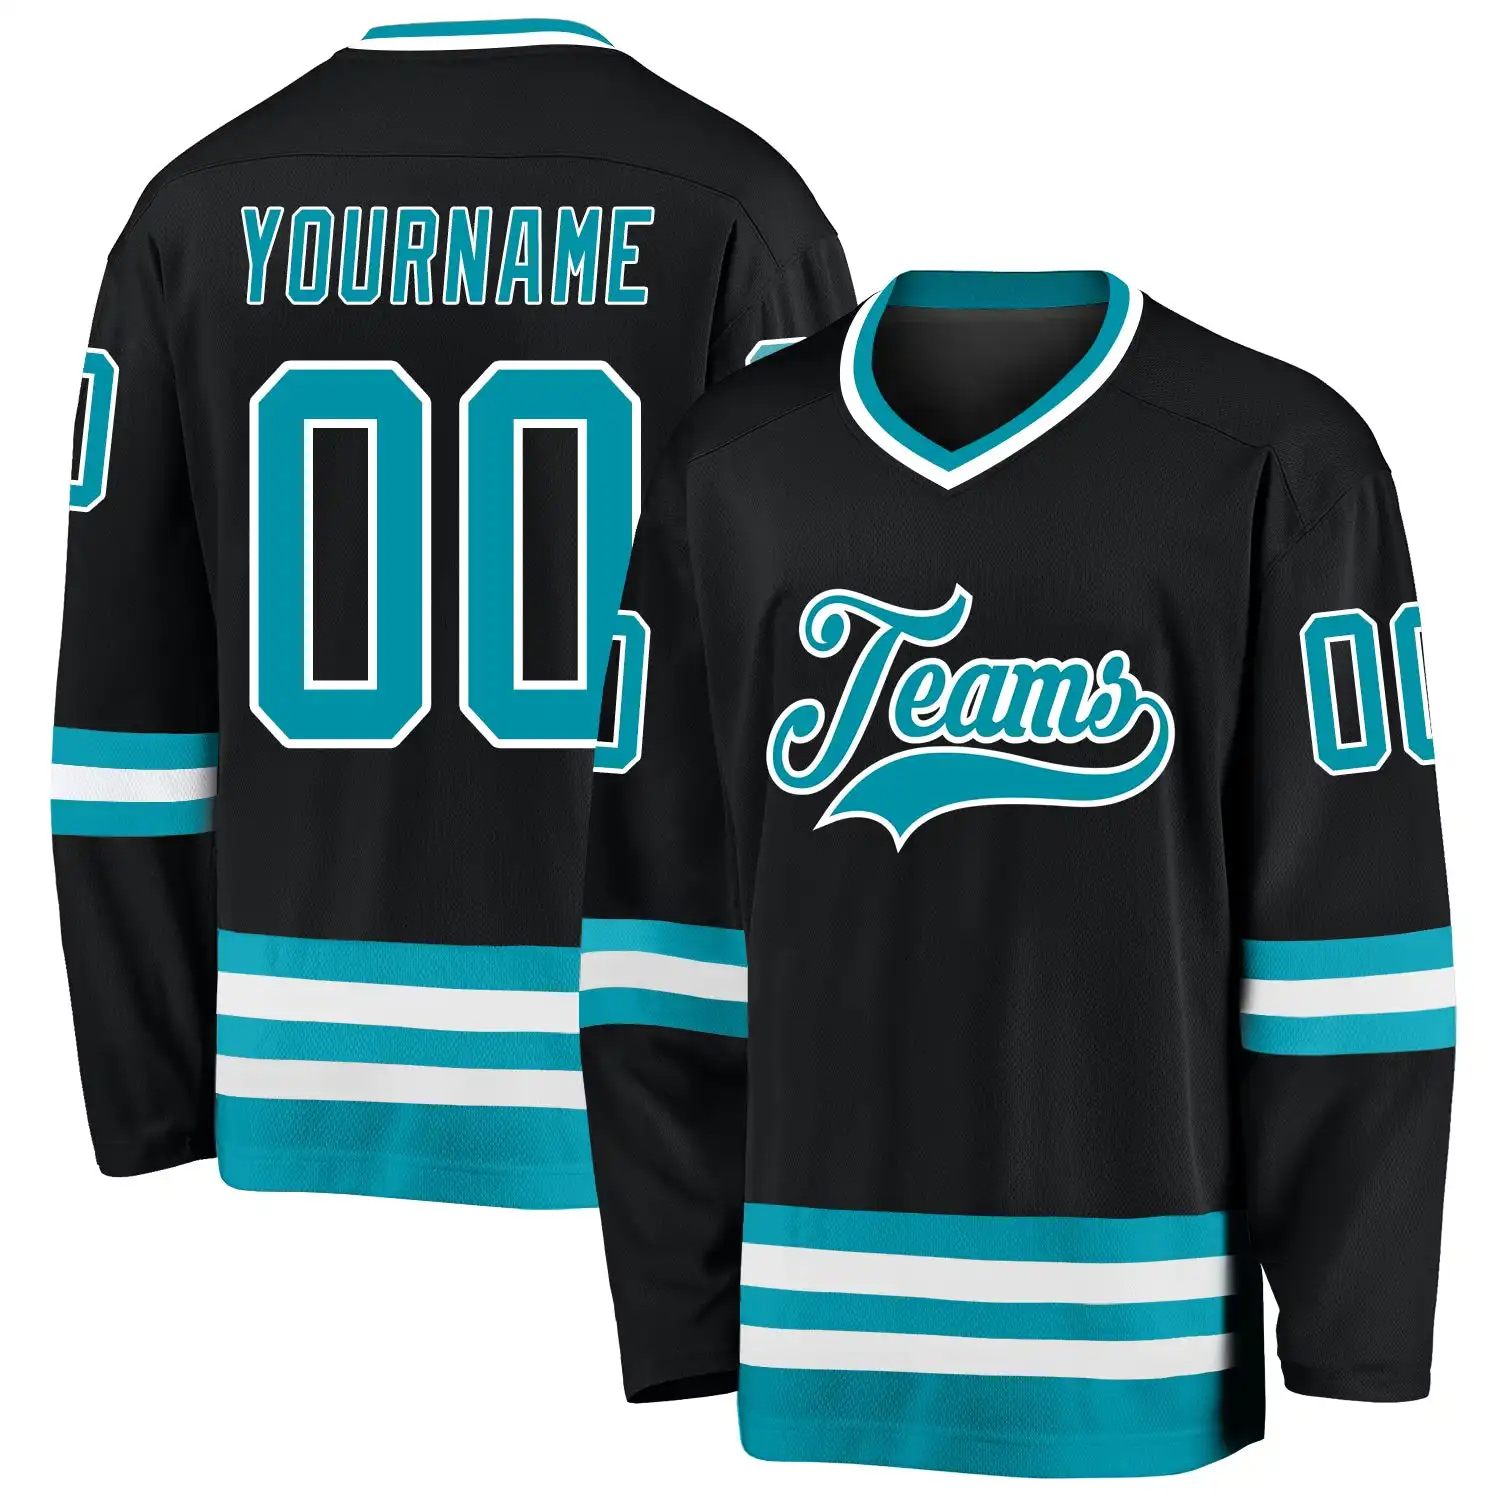 Stitched And Print Black Teal-white Hockey Jersey Custom